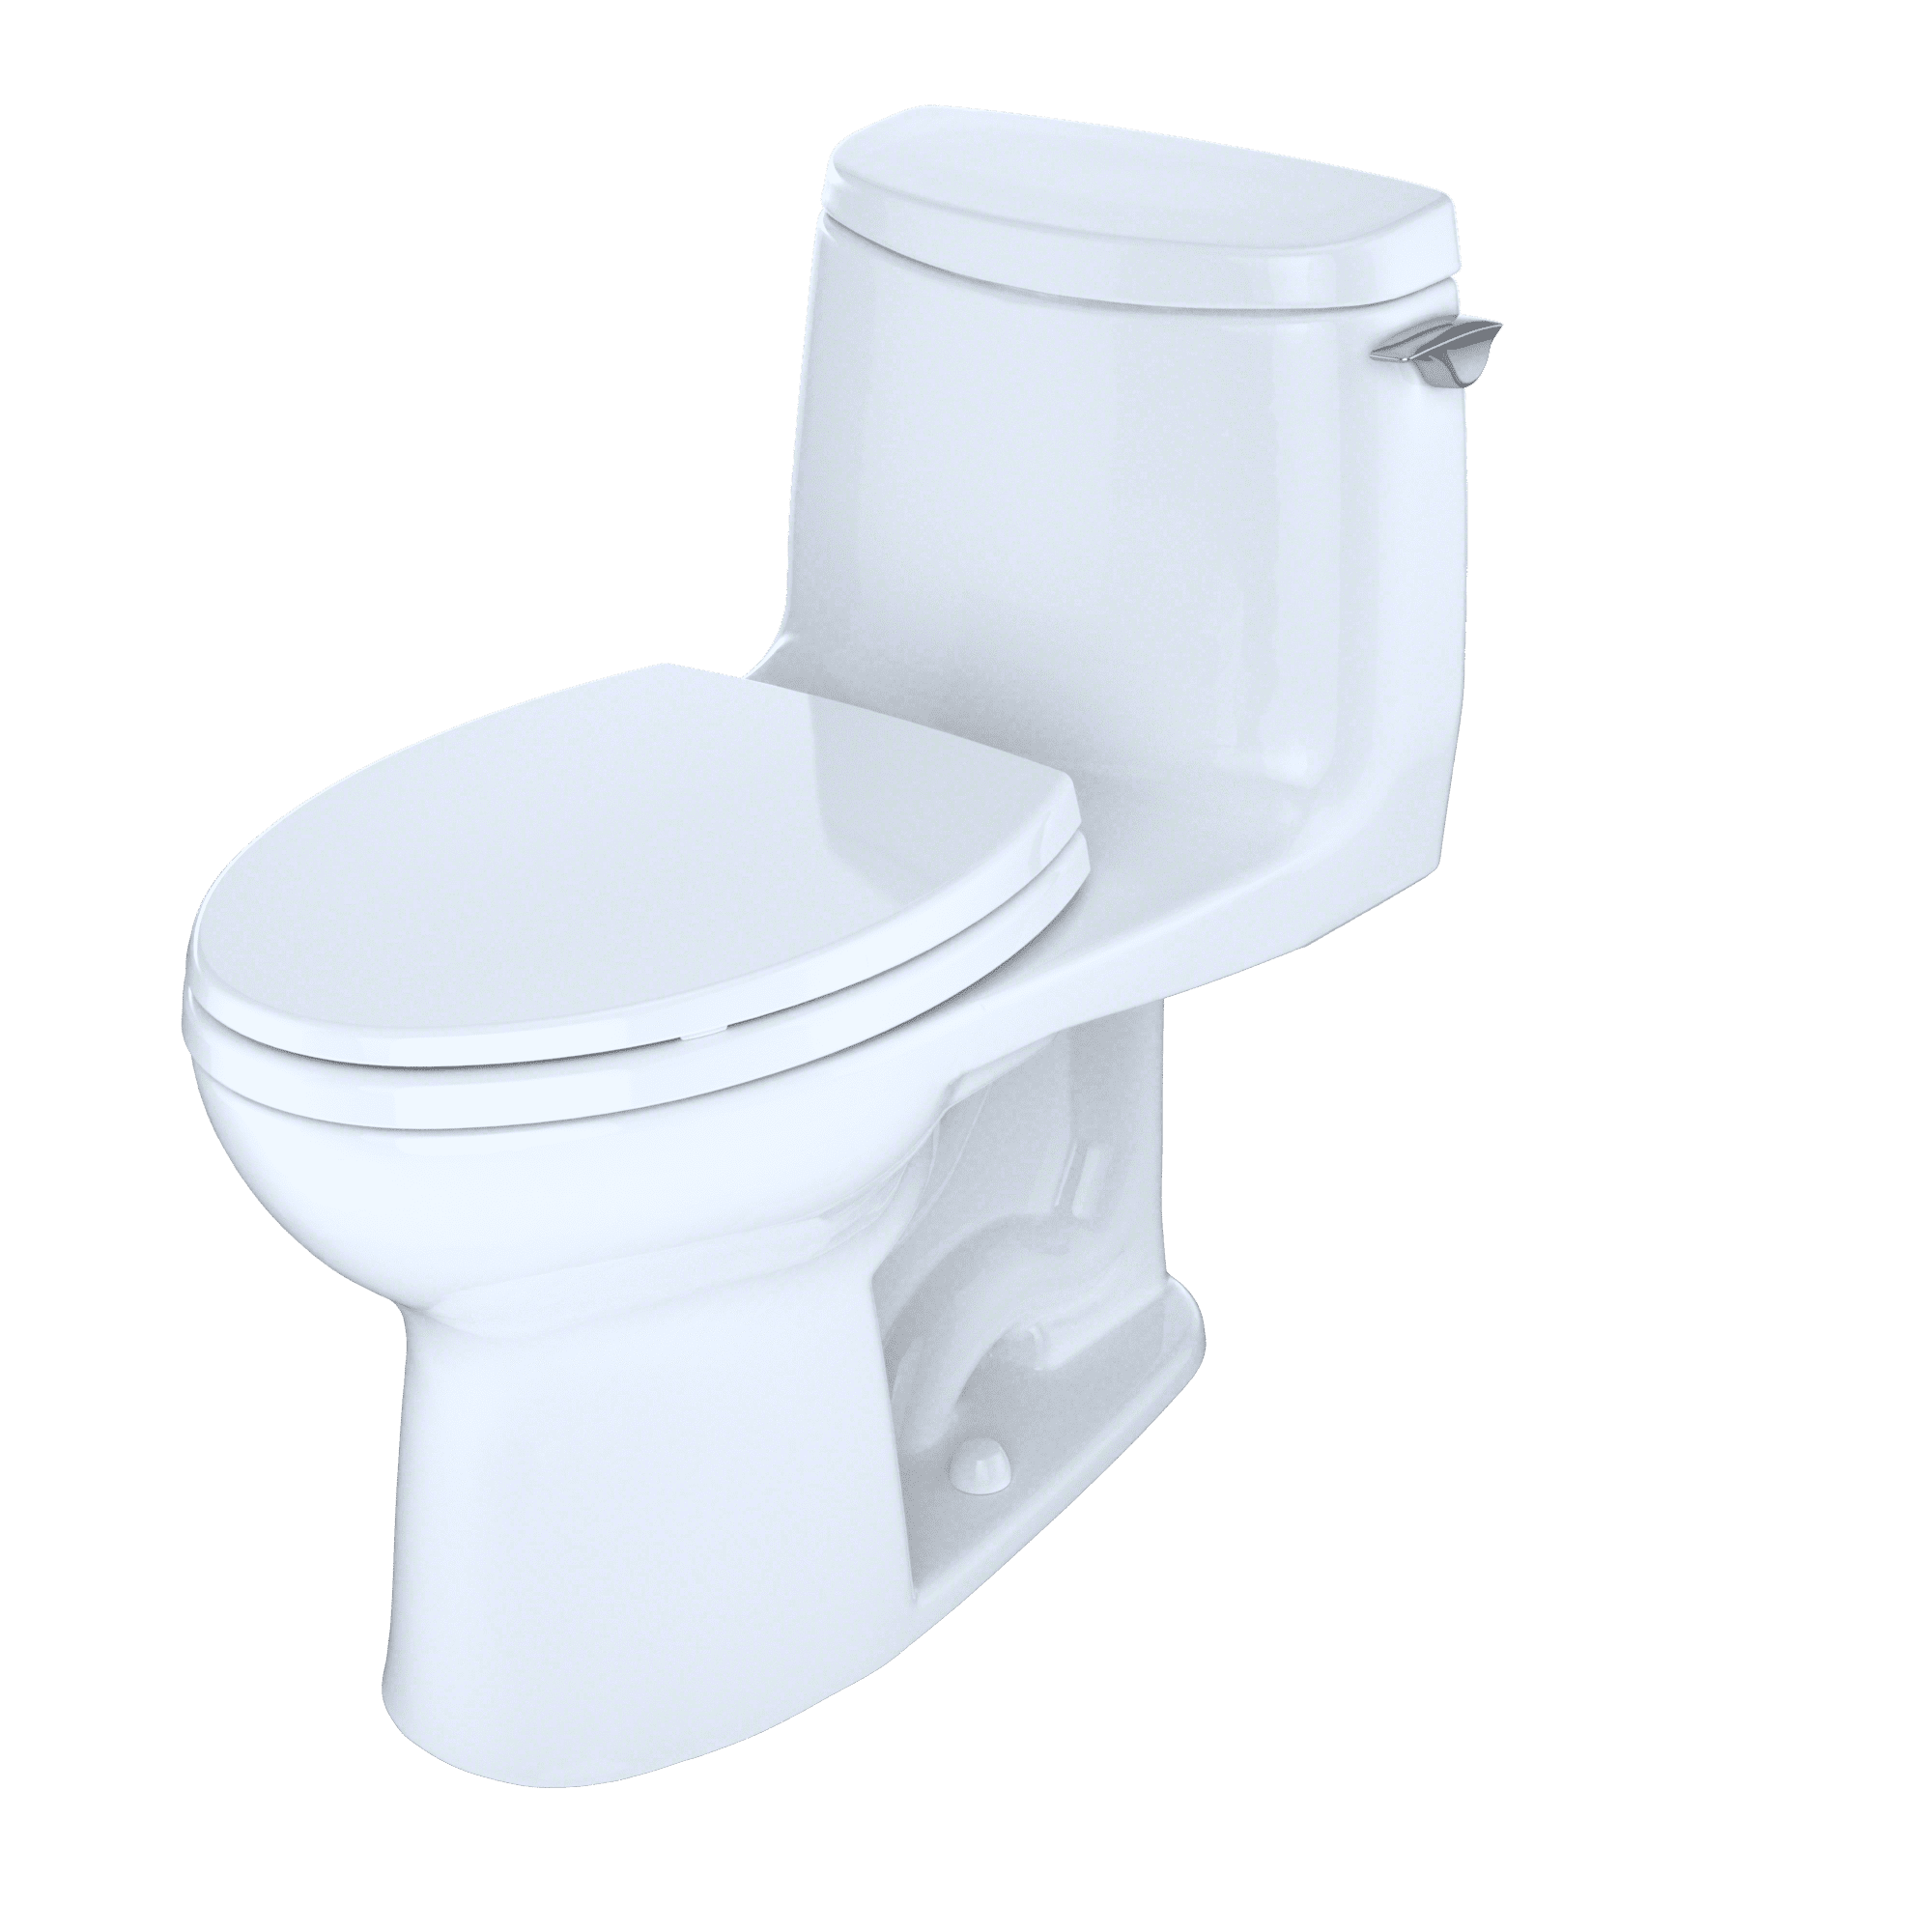 Toto Ultramax Ii G One Piece Elongated Gpf Universal Height Toilet With Cefiontect And